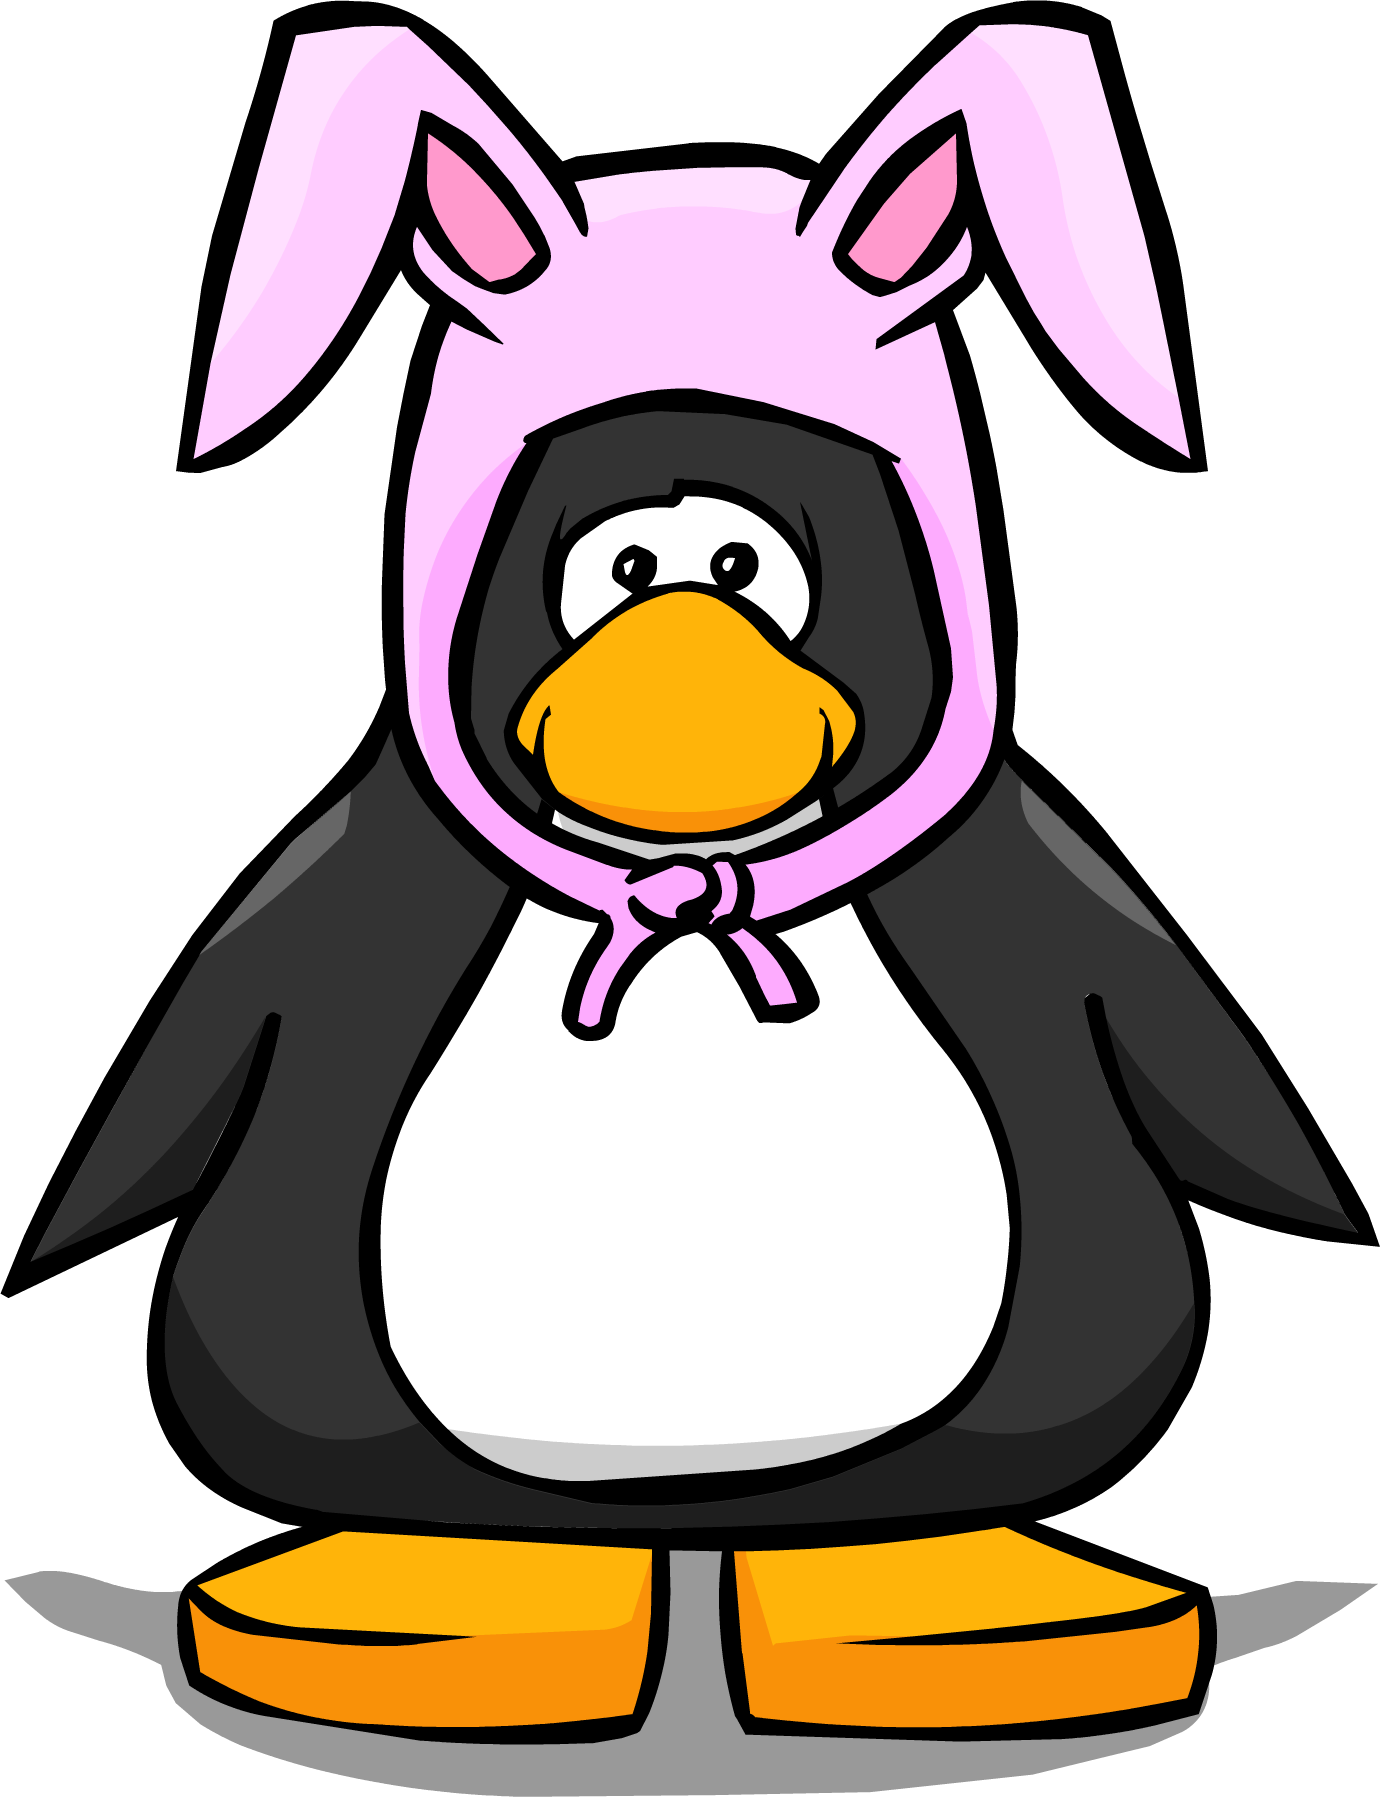 Pink Bunny Ears 1 - Club Penguin Chef Hat (1380x1797)